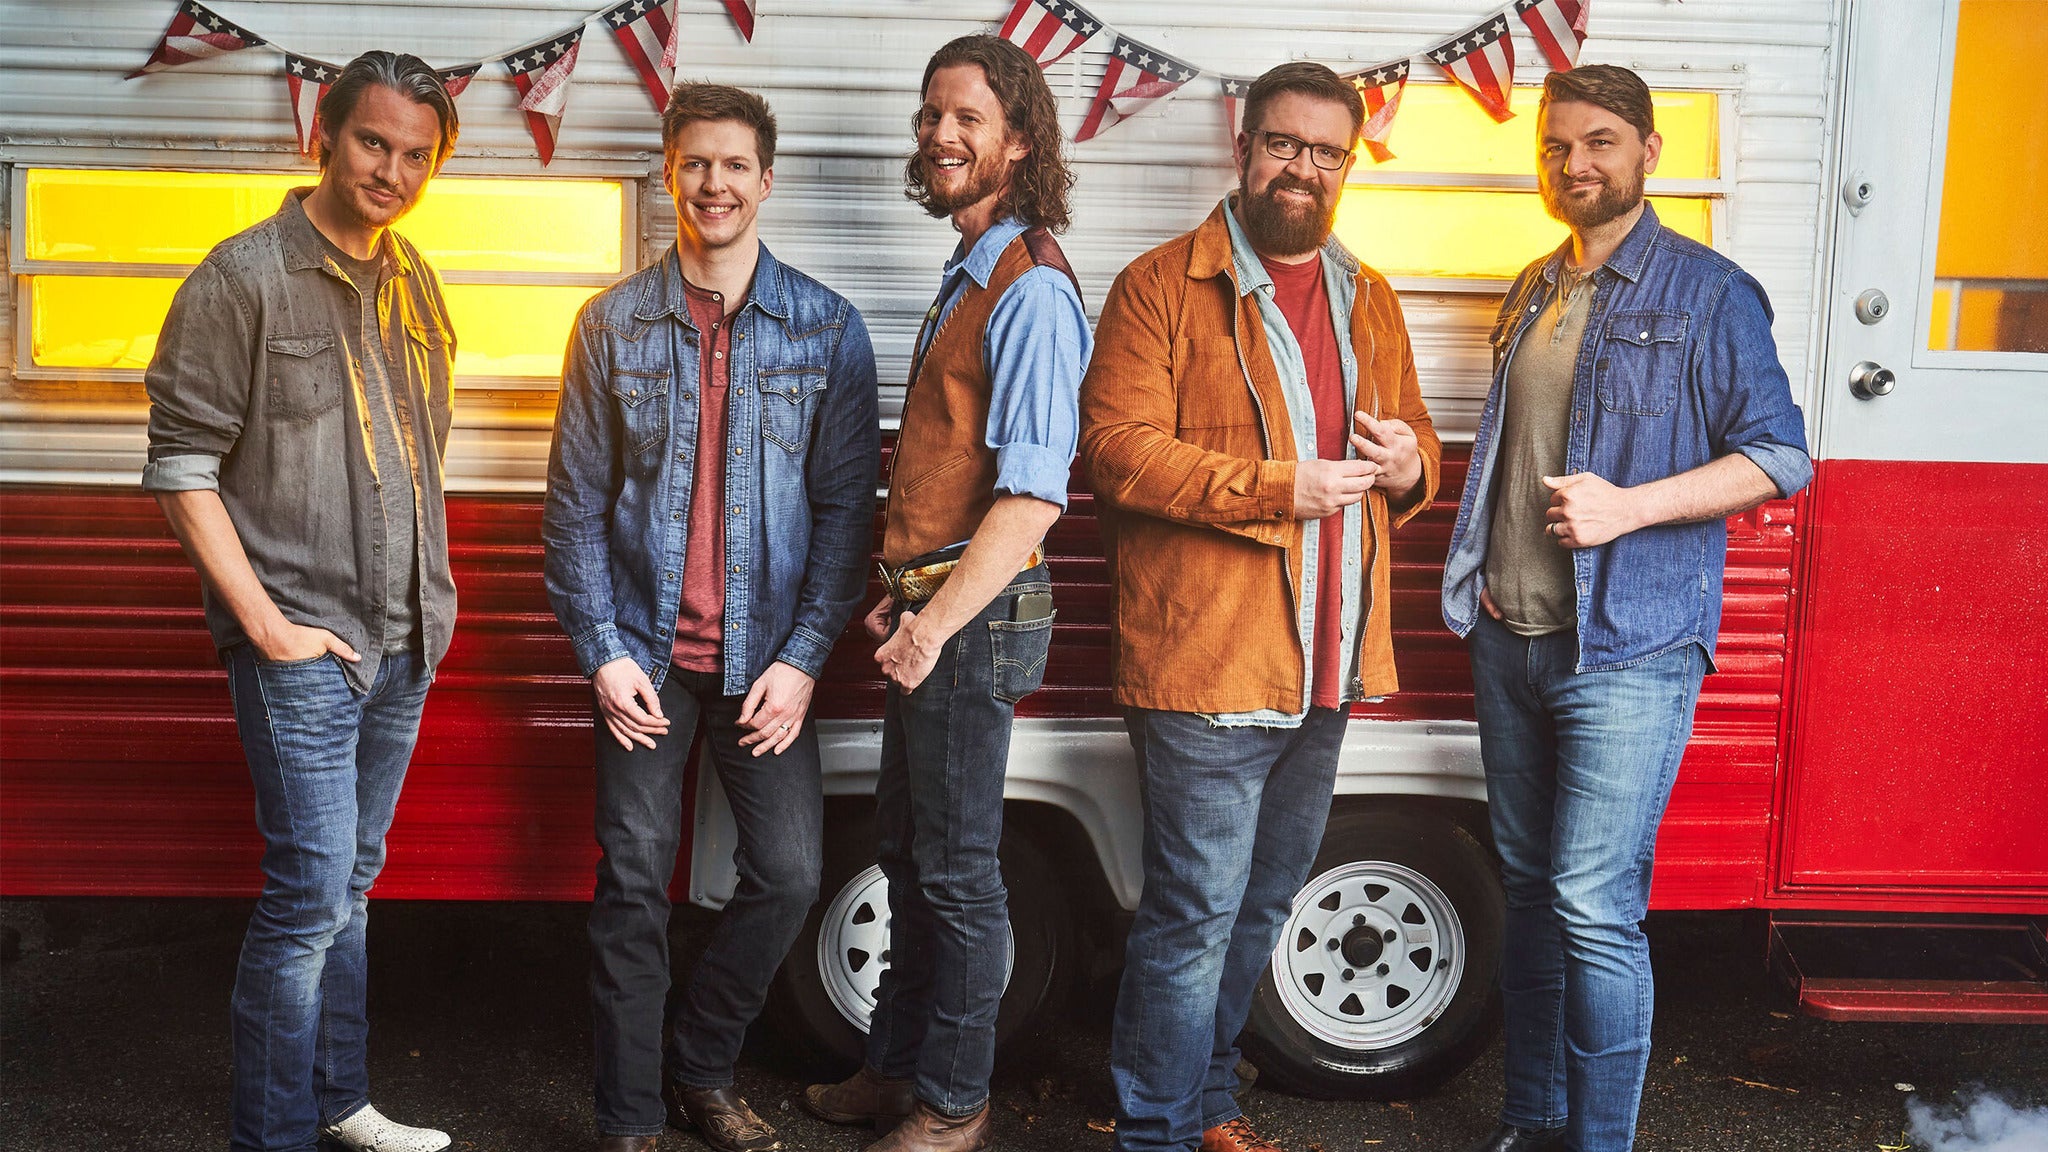 Home Free: Road Sweet Road Tour presale c0de for legit tickets in Knoxville